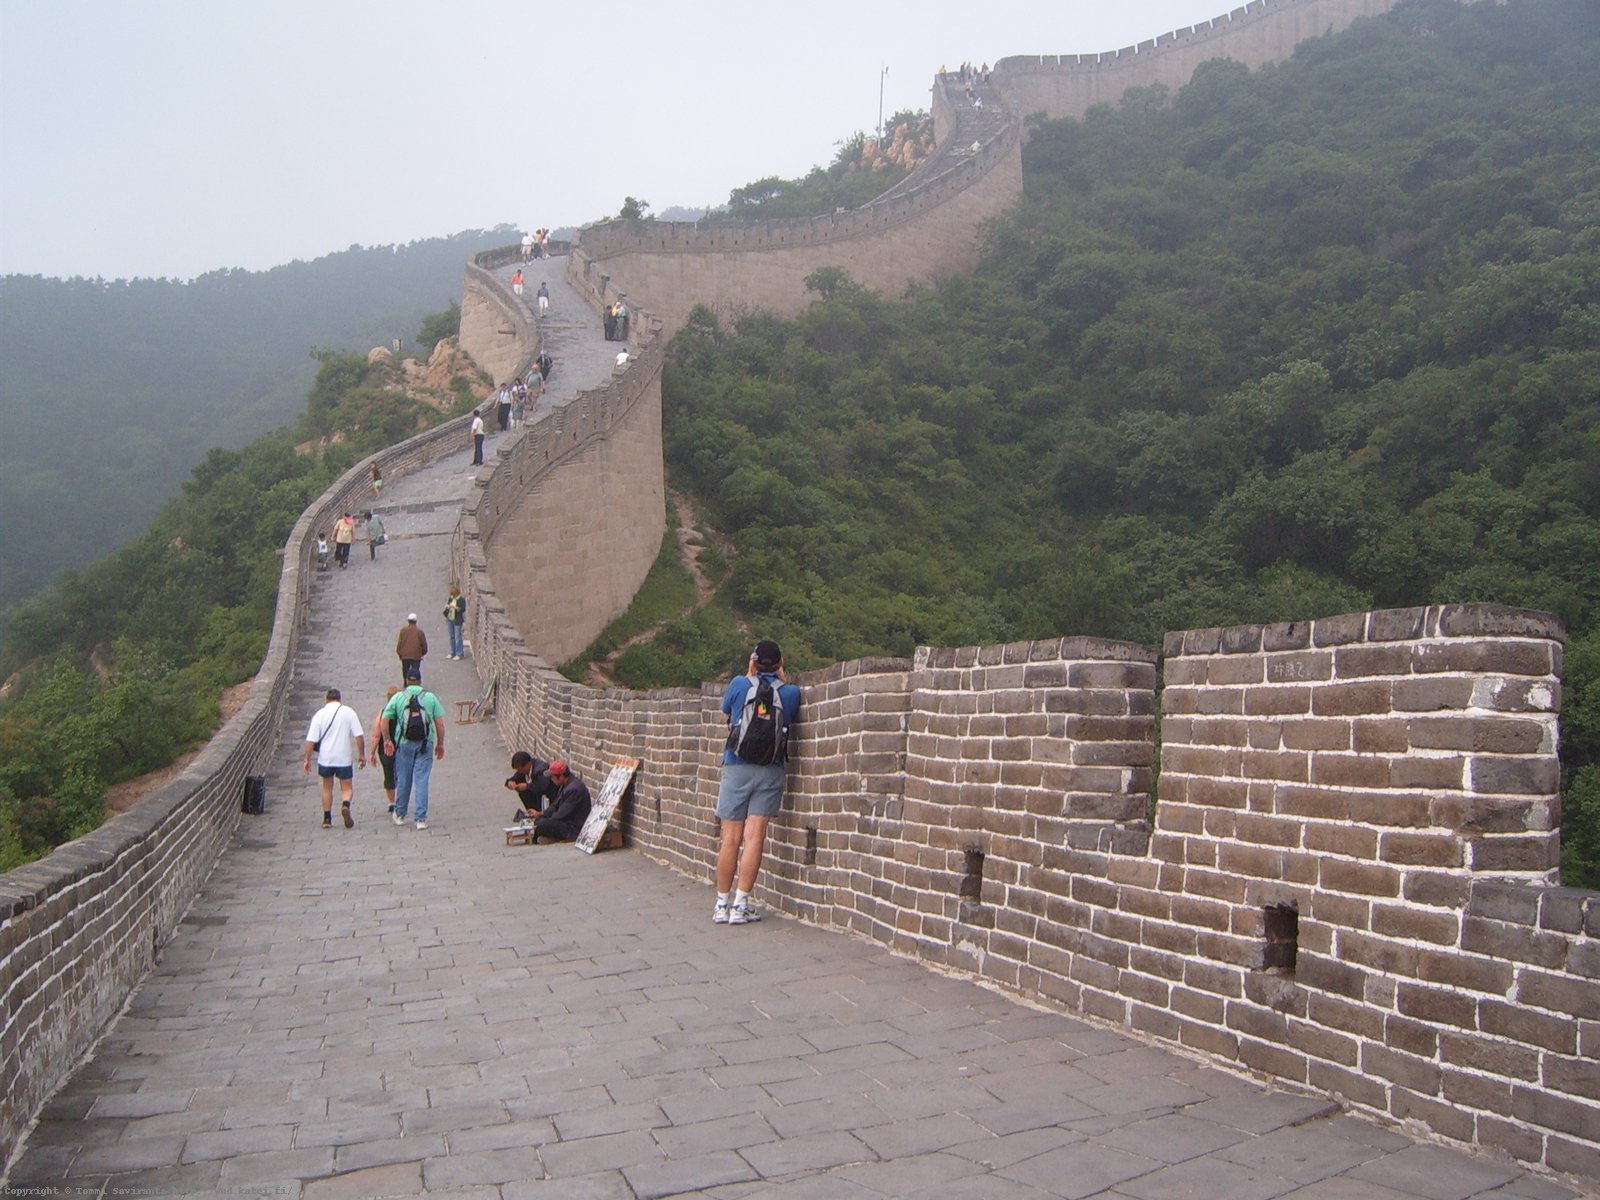 Day #2: The Great Wall